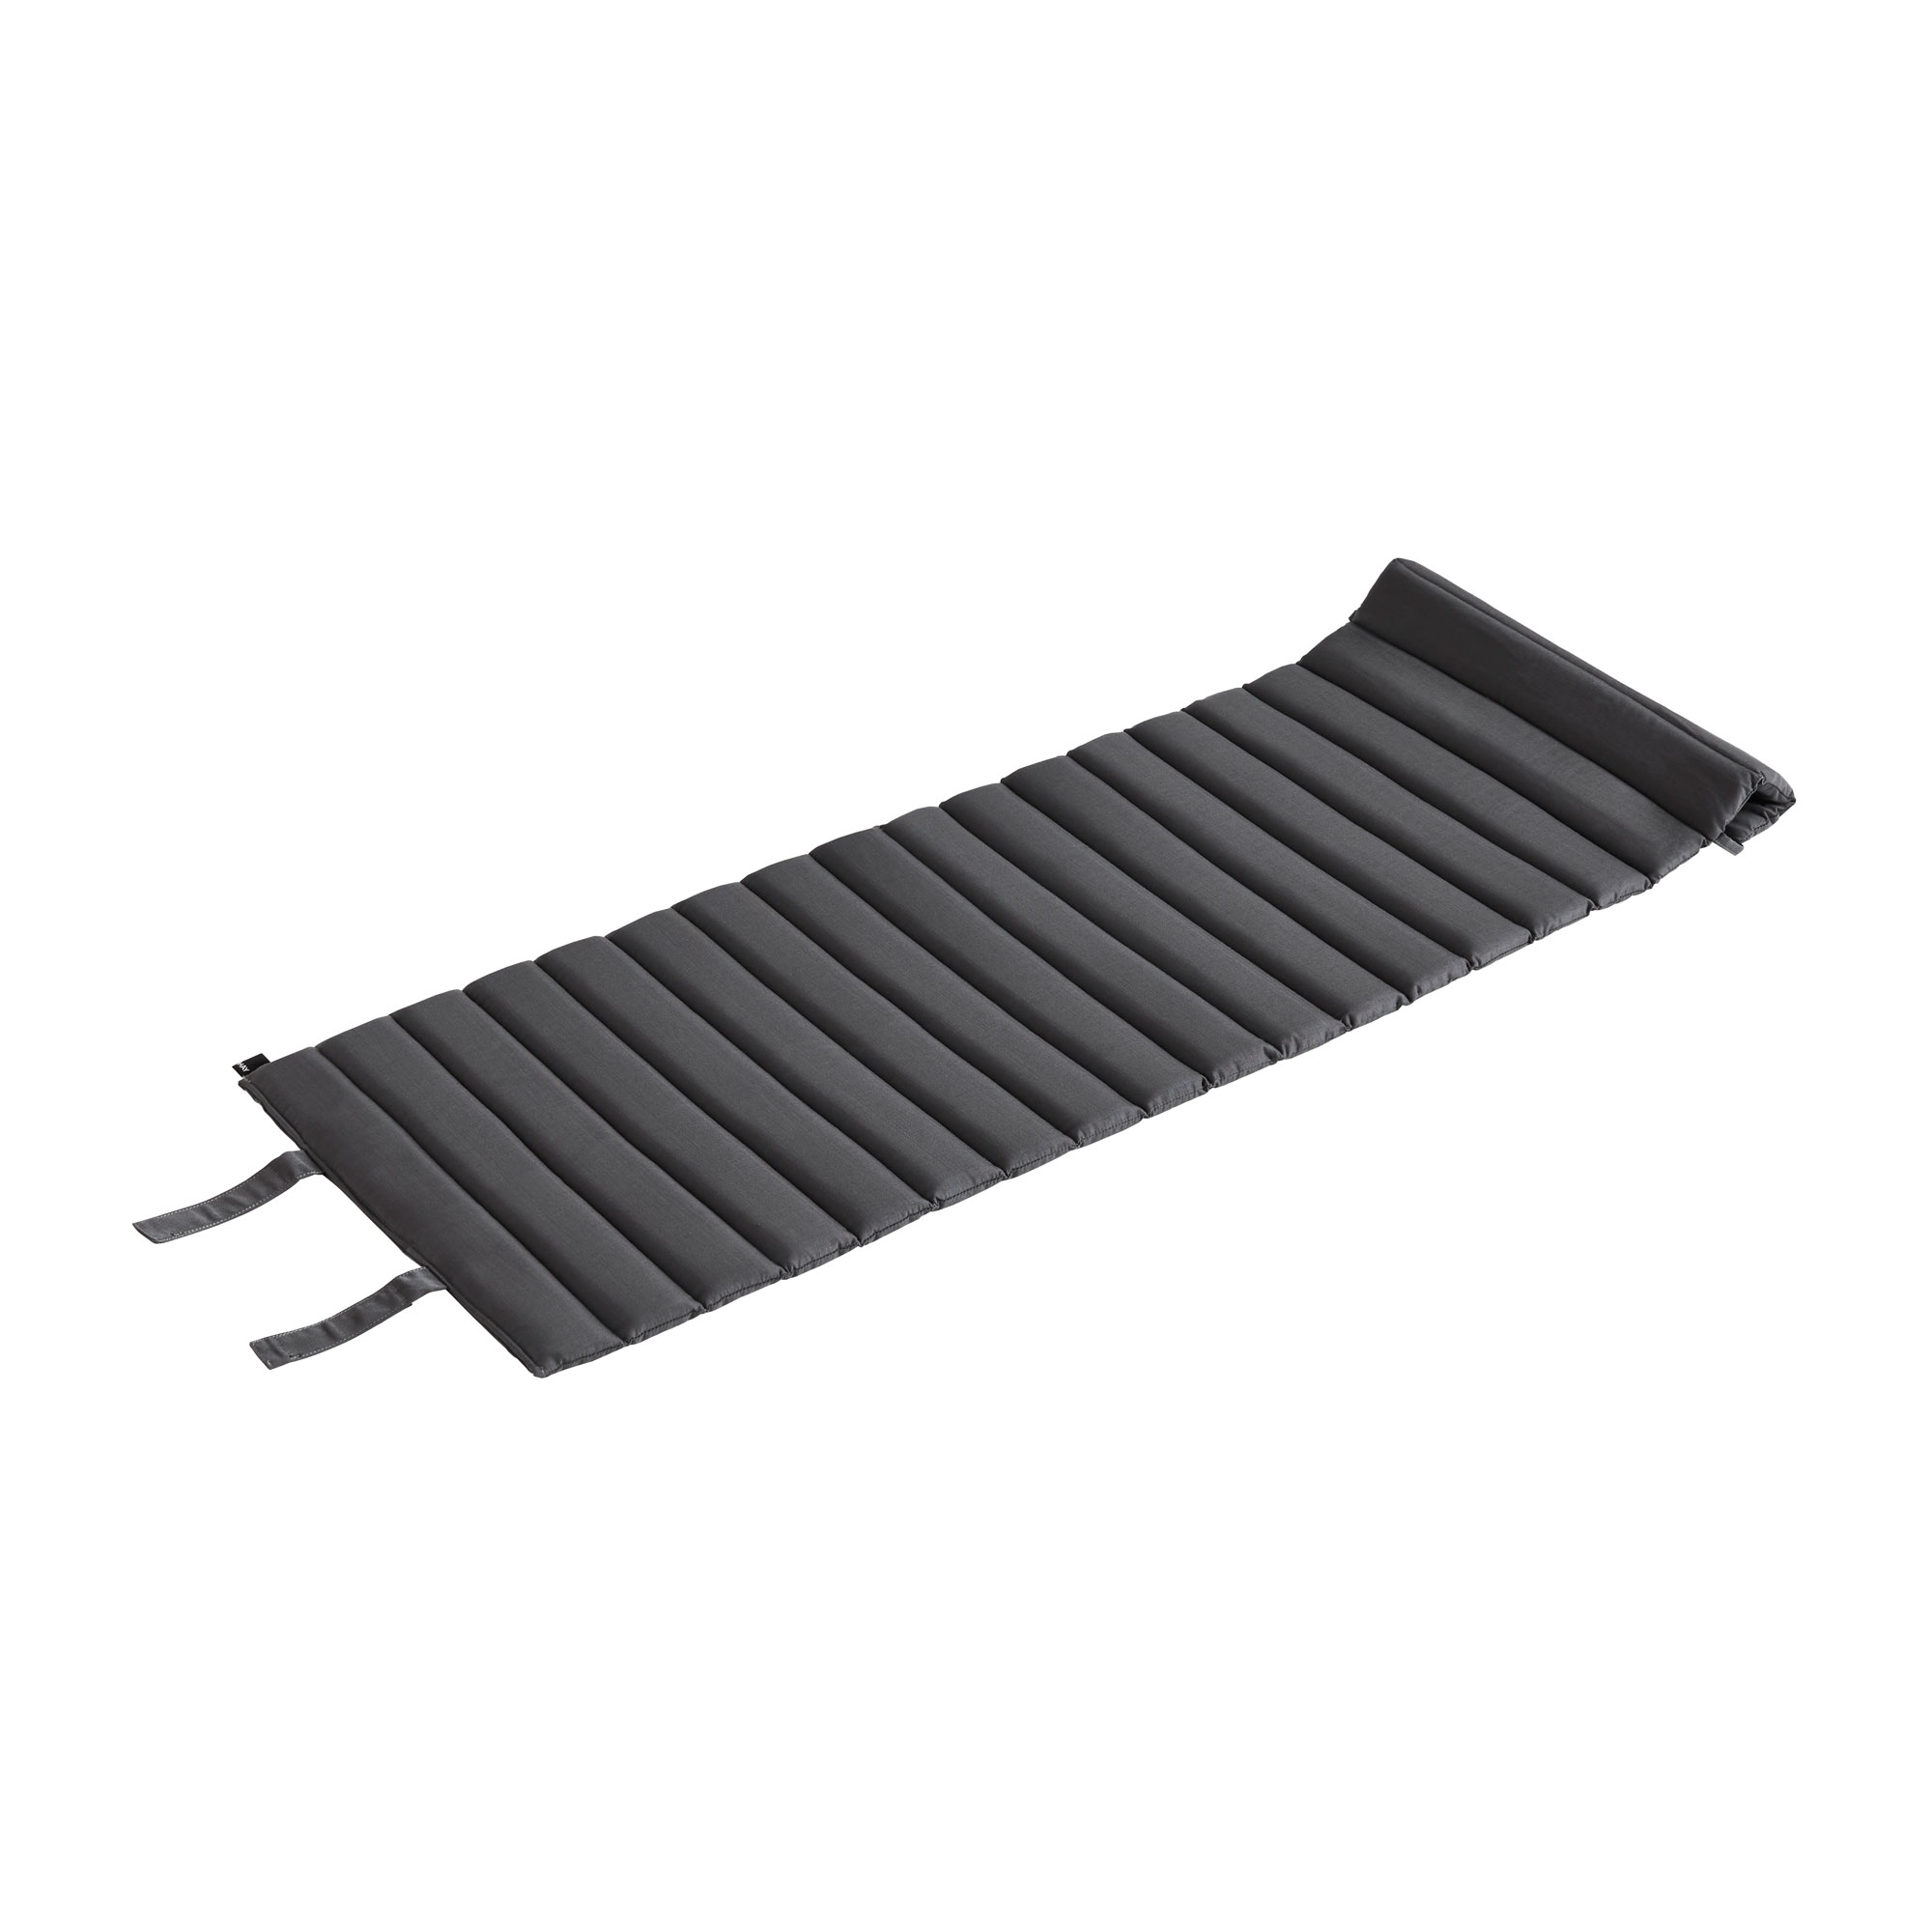 HAY - Coussin matelass Crate 130x44,5cm - anthracite/hydrofuge Tflon/pour chaise Crate Lounge